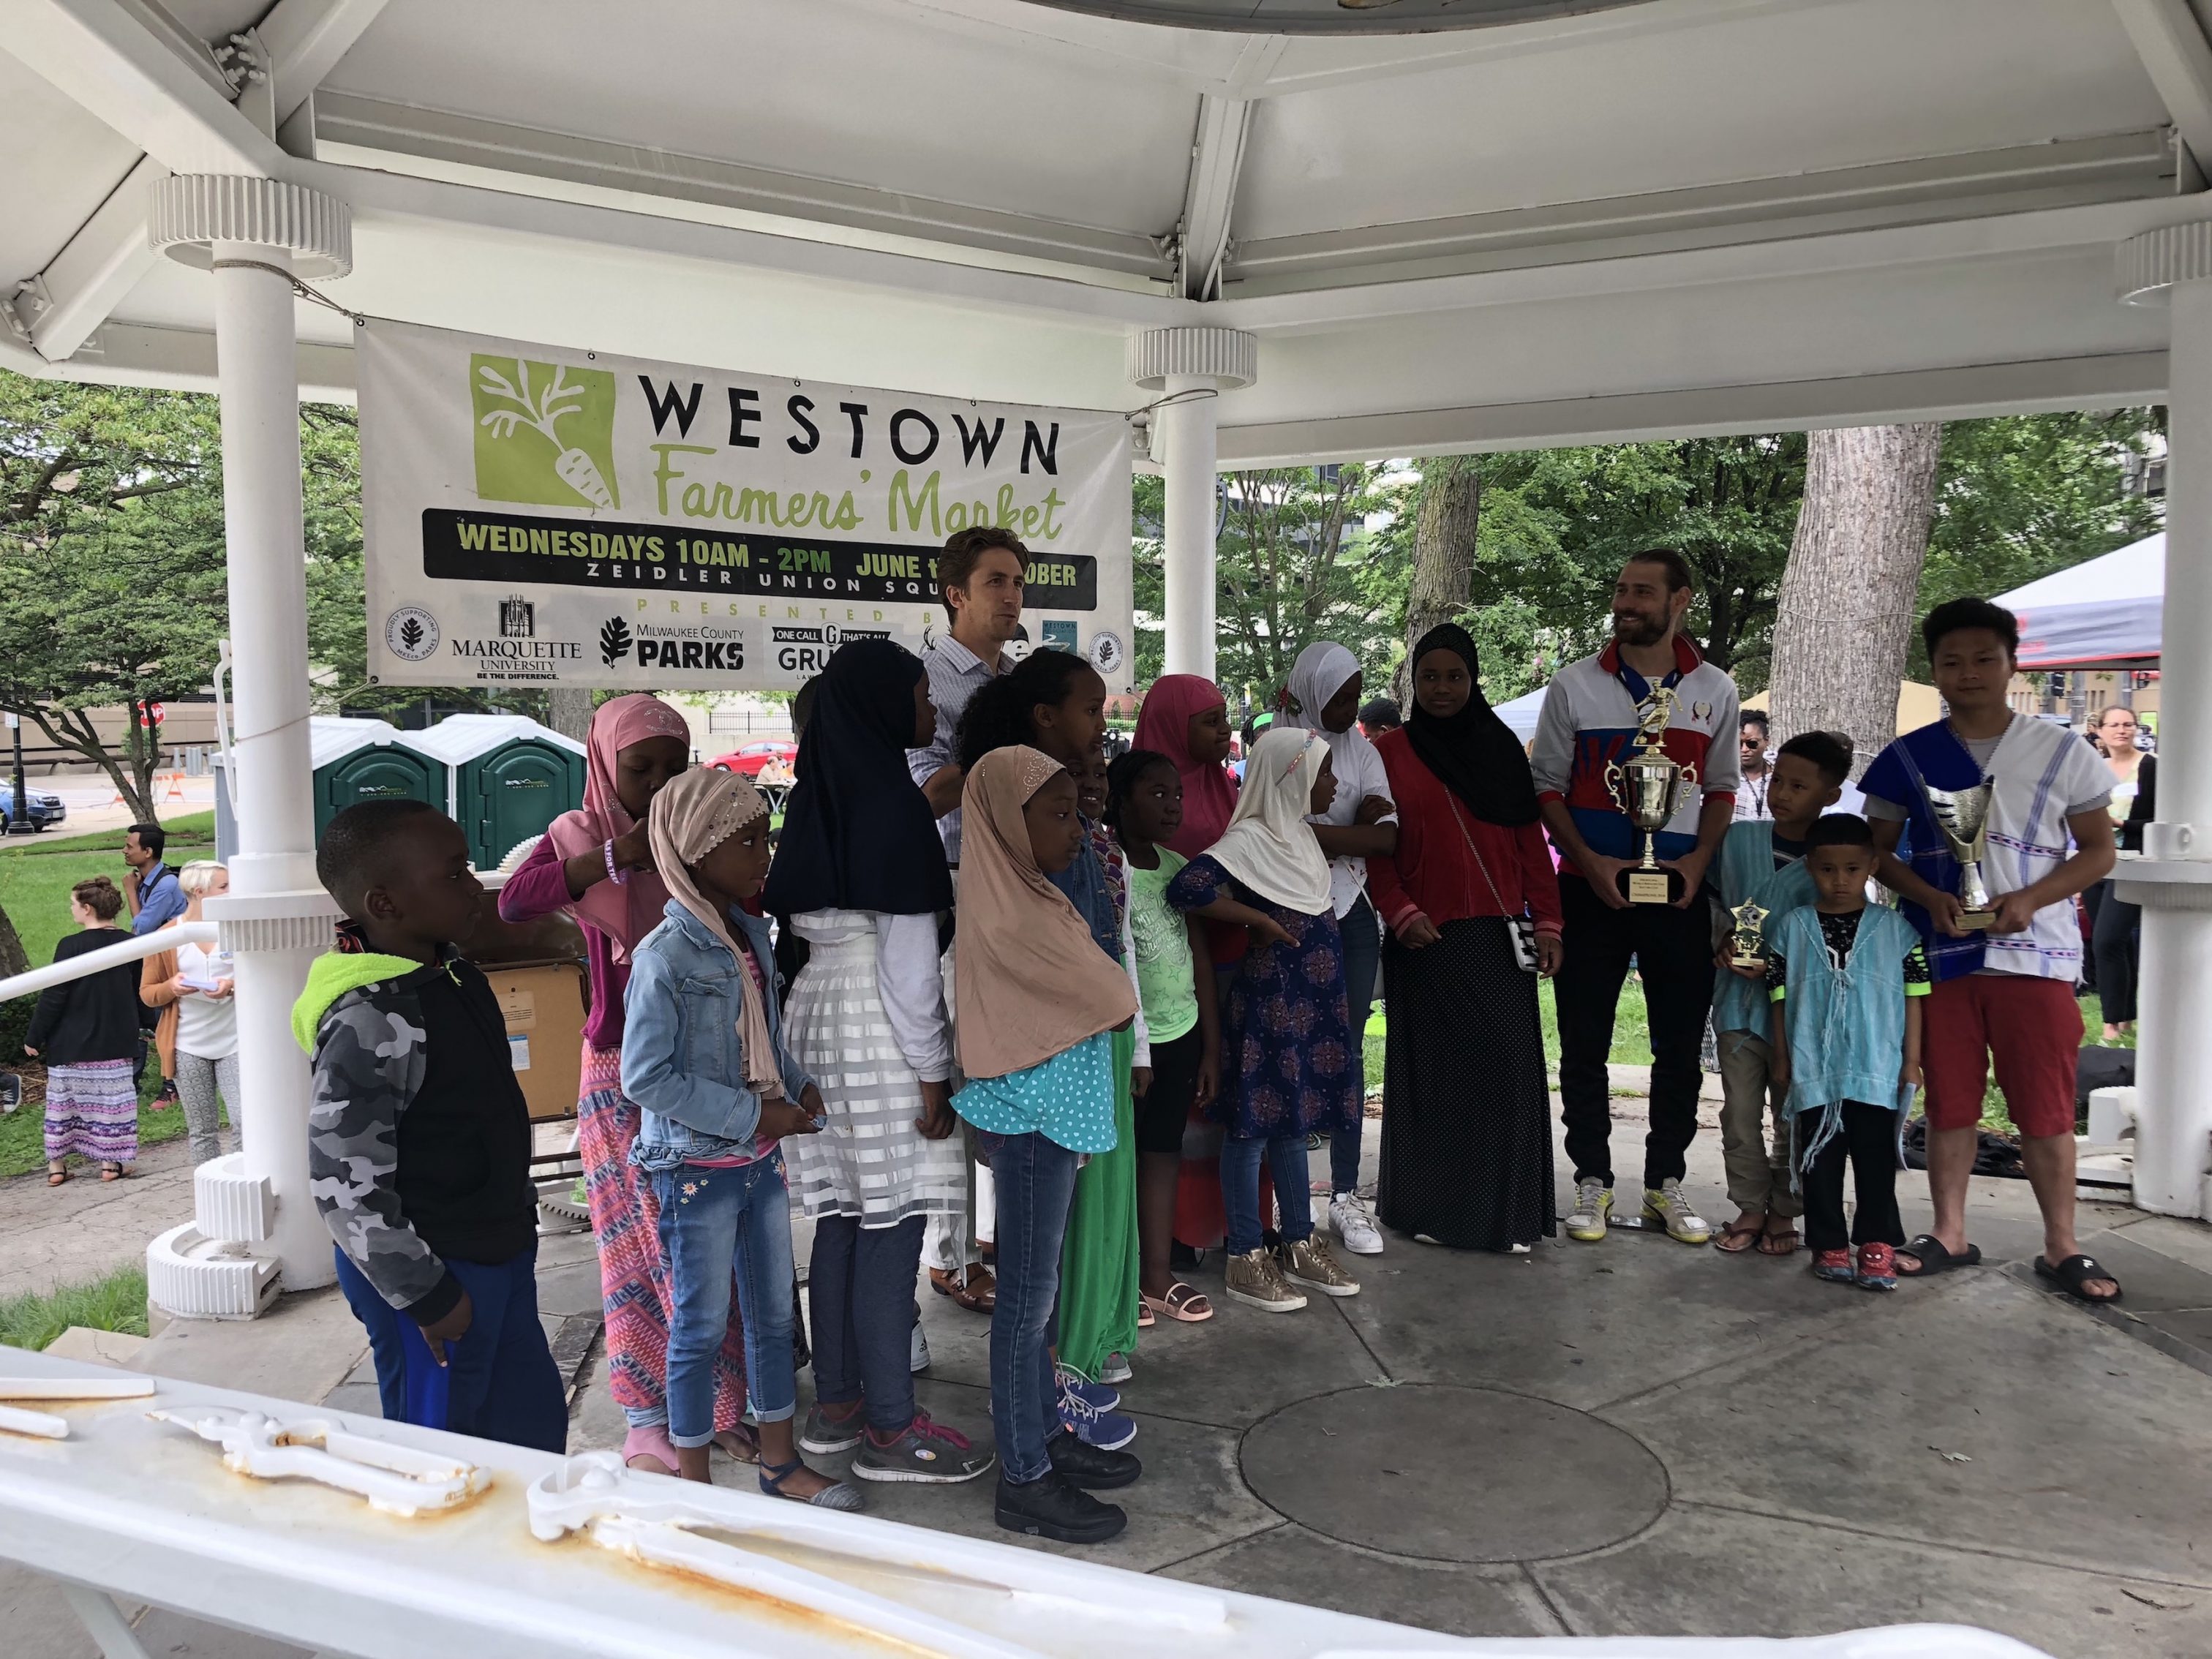 On June 20, 2018, the International Institute of Wisconsin sponsored a World Refugee Celebration at Zeidler Park to increase refugee awareness in Milwaukee and celebrate refugees' cultures. 